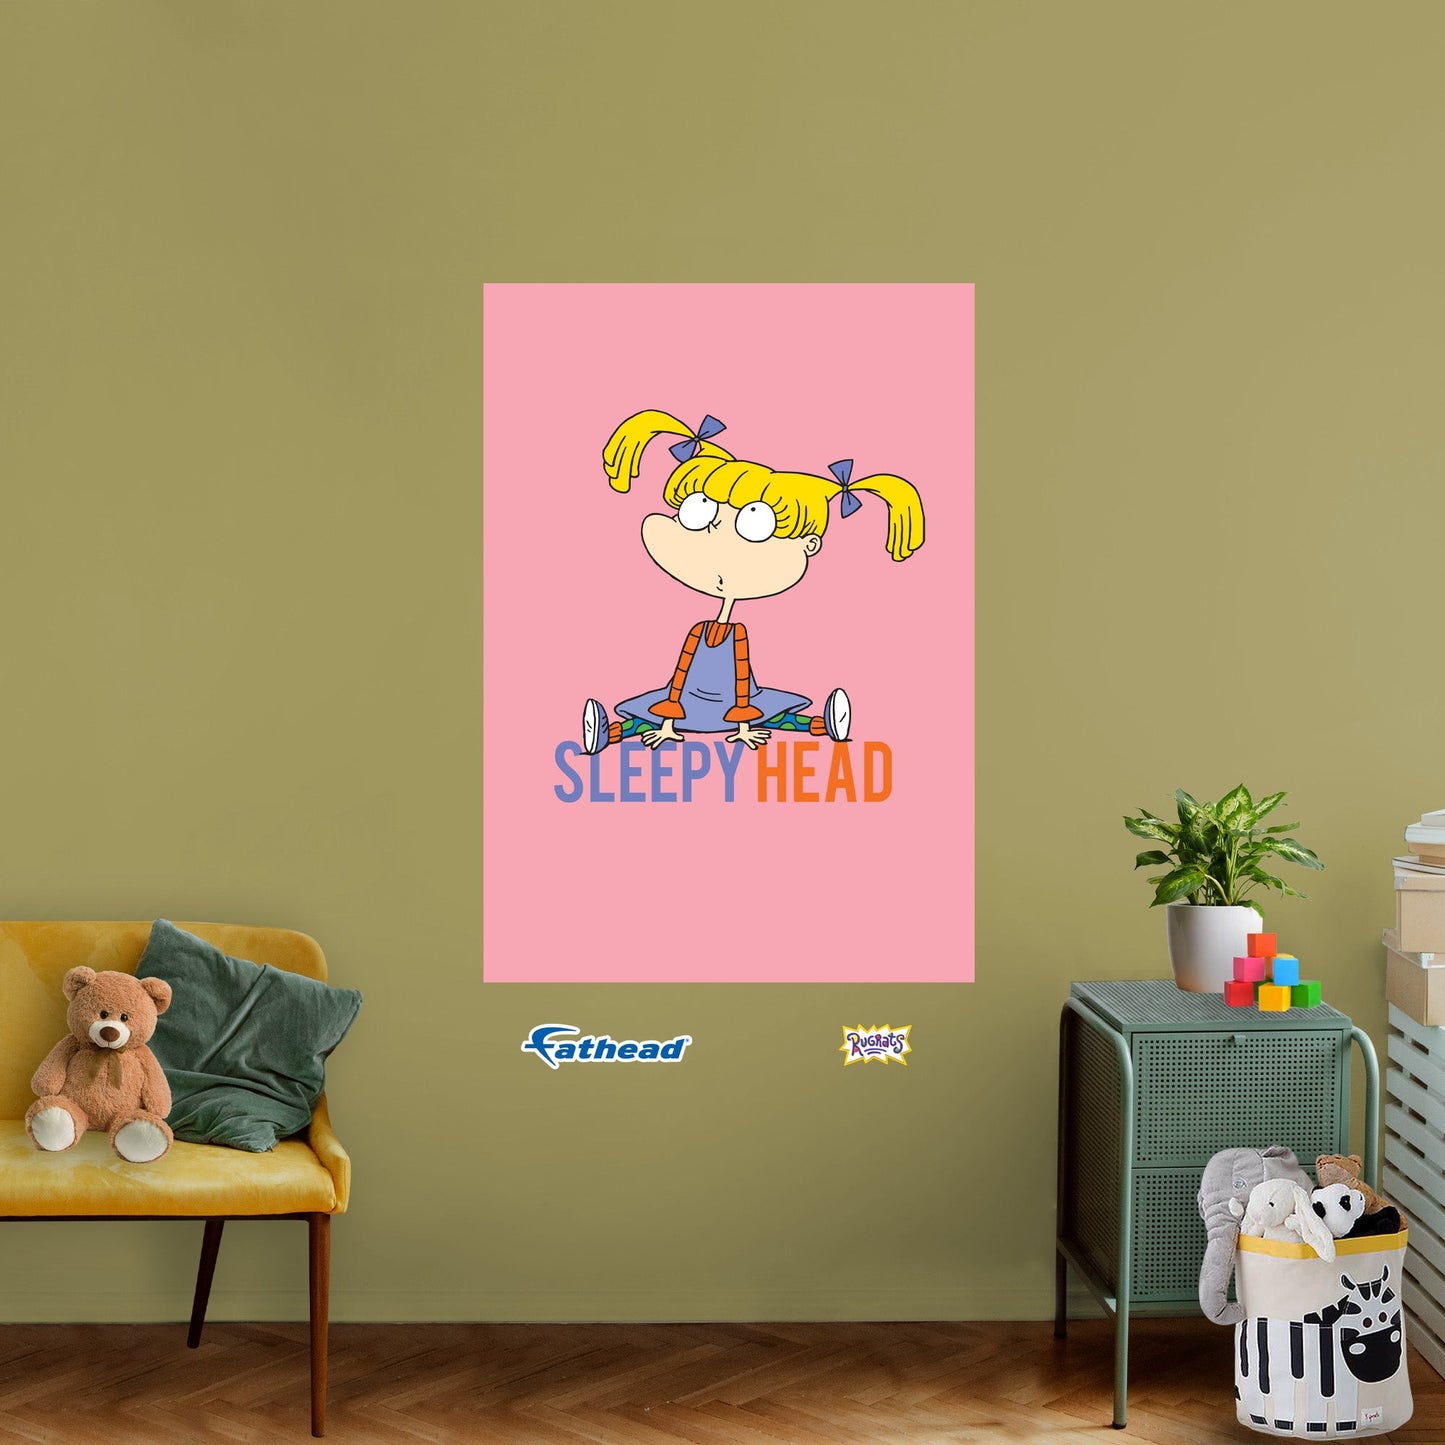 Rugrats: Sleepy Head Poster - Officially Licensed Nickelodeon Removable Adhesive Decal